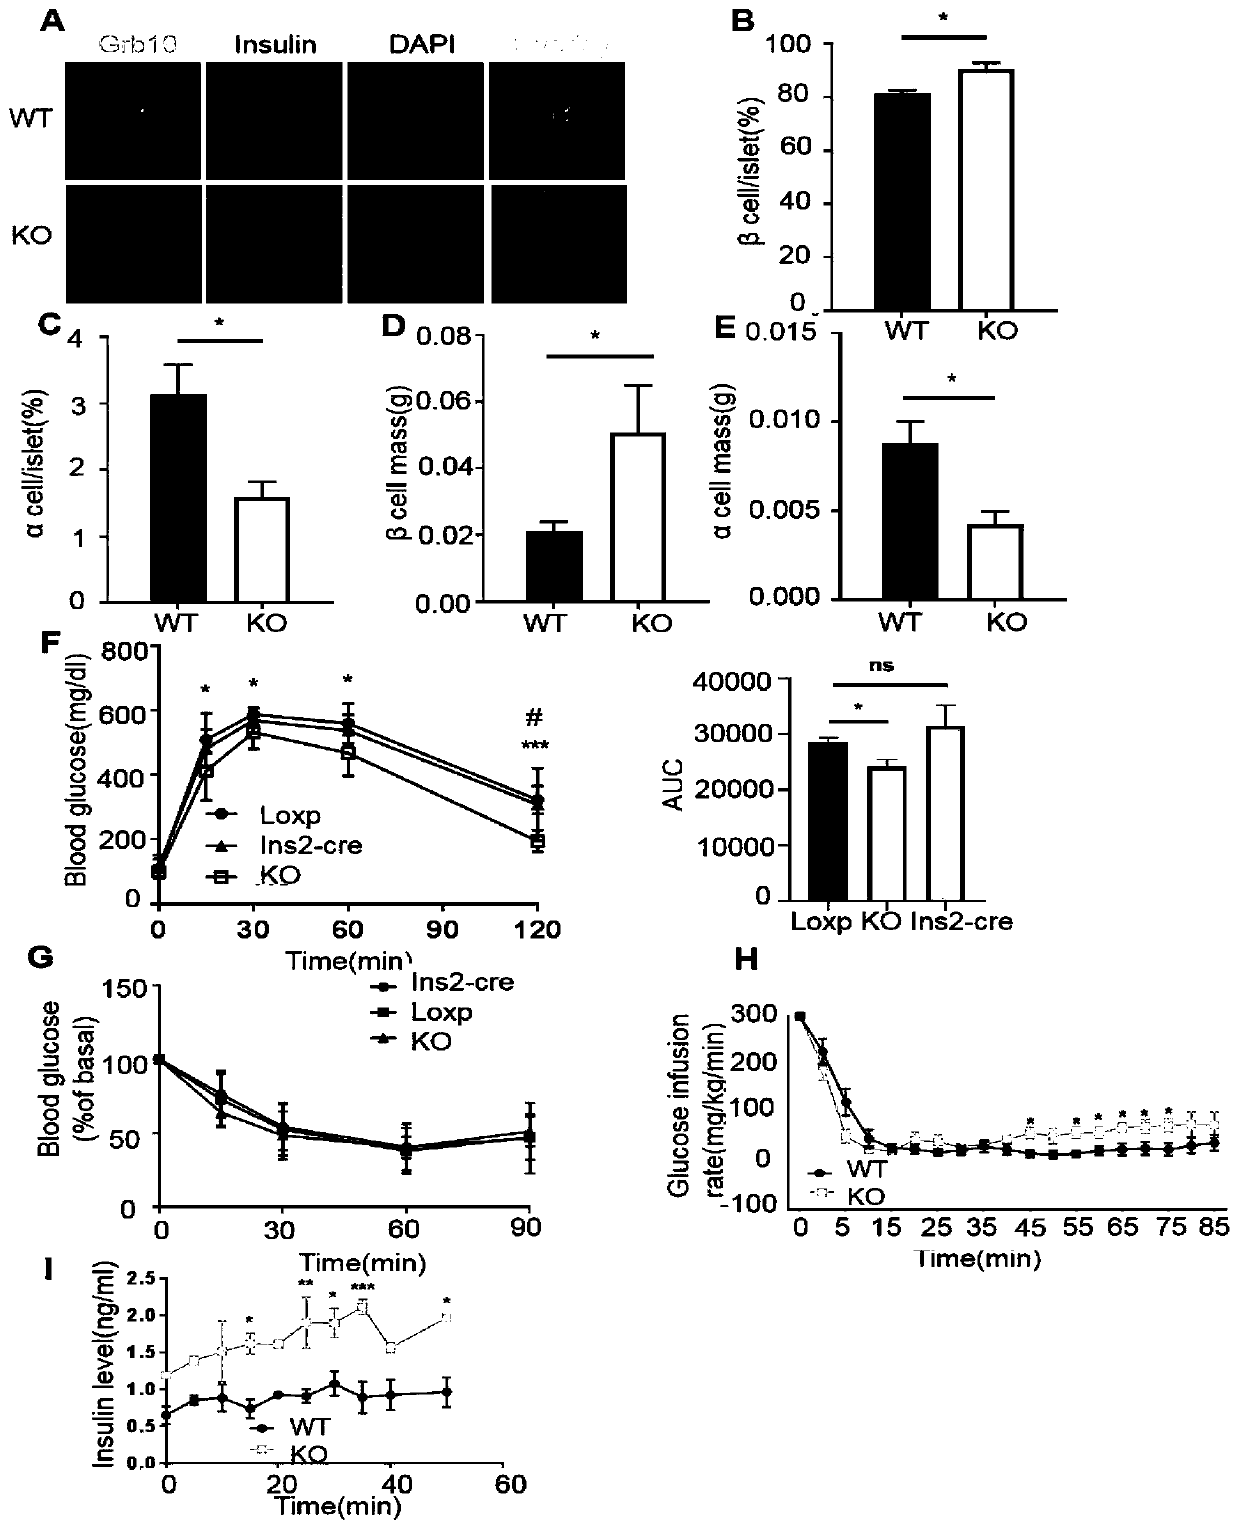 Application of Grb10 as key negative regulation factor of beta cell dysfunction